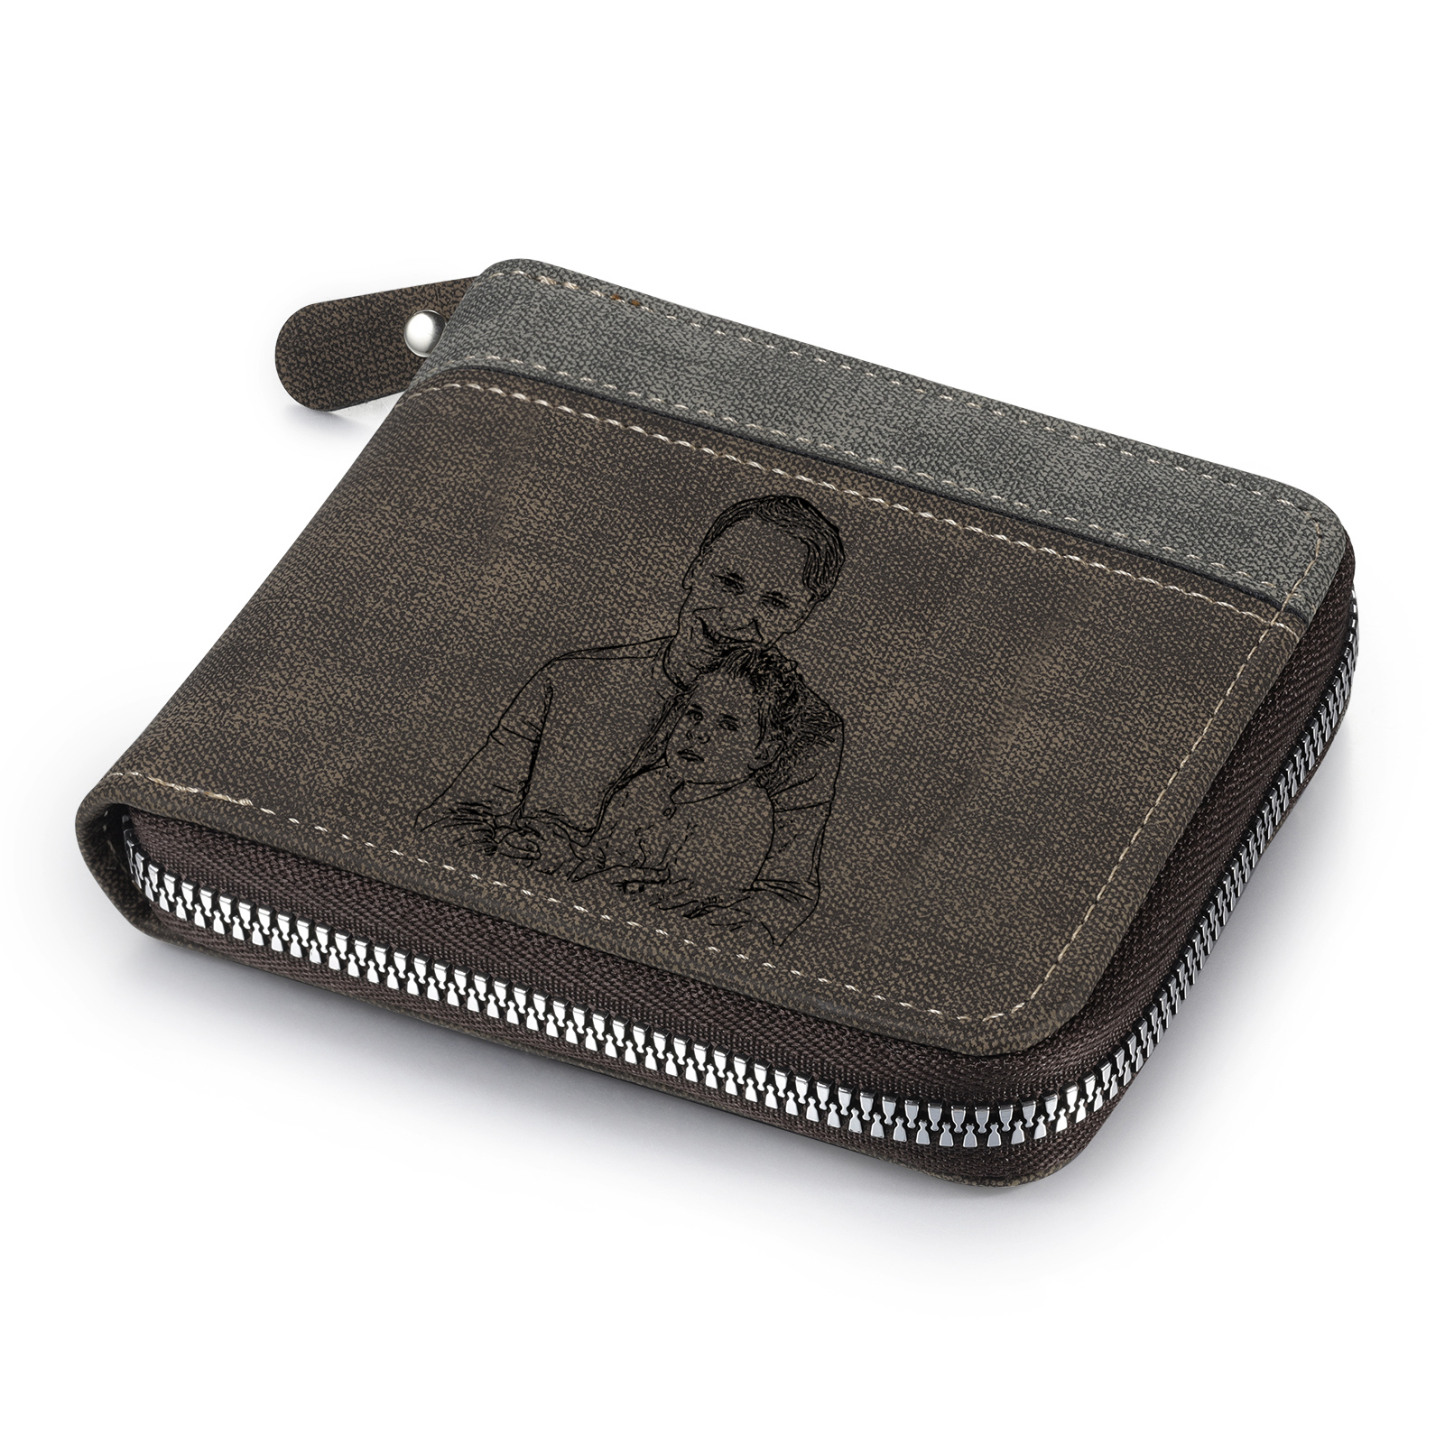 4-Names Personalized Leather Men's wallet With Card Slot Engraved With Name And Photo For Papa As a Father's Day Unique Gift